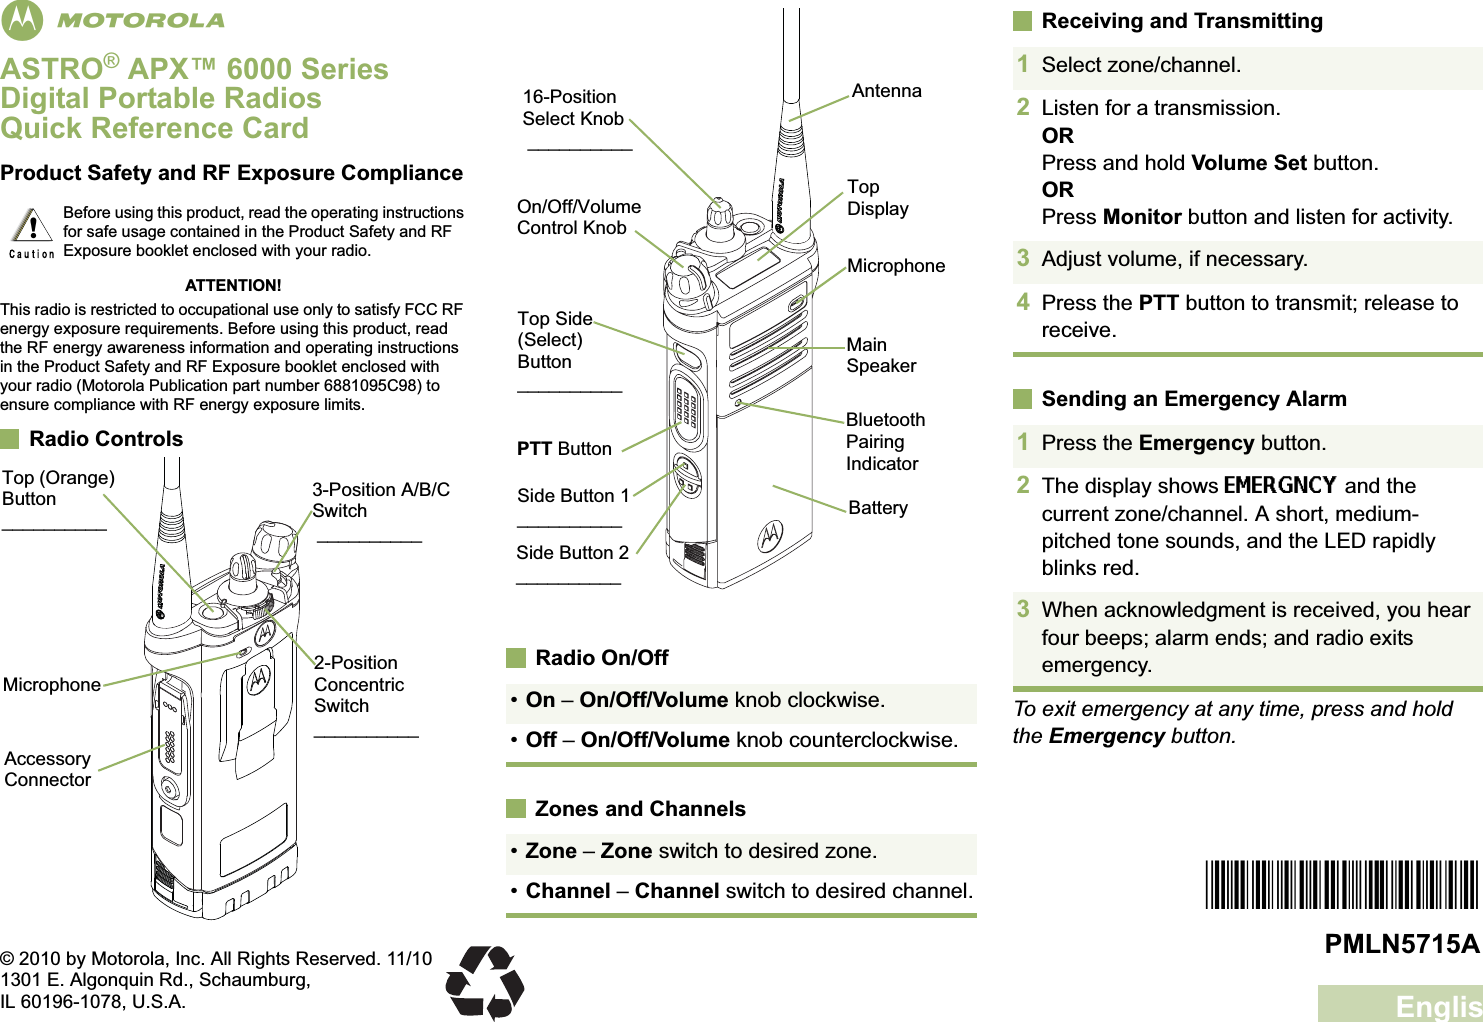 EnglishmASTRO® APX™ 6000 Series Digital Portable RadiosQuick Reference CardProduct Safety and RF Exposure ComplianceATTENTION!This radio is restricted to occupational use only to satisfy FCC RF energy exposure requirements. Before using this product, read the RF energy awareness information and operating instructions in the Product Safety and RF Exposure booklet enclosed with your radio (Motorola Publication part number 6881095C98) to ensure compliance with RF energy exposure limits. Radio ControlsRadio On/OffZones and ChannelsReceiving and TransmittingSending an Emergency AlarmTo exit emergency at any time, press and hold the Emergency button.Before using this product, read the operating instructions for safe usage contained in the Product Safety and RF Exposure booklet enclosed with your radio.!2-Position Concentric Switch__________MicrophoneAccessory Connector•On – On/Off/Volume knob clockwise.•Off – On/Off/Volume knob counterclockwise.•Zone – Zone switch to desired zone.•Channel – Channel switch to desired channel.Top DisplayBluetooth Pairing IndicatorMain SpeakerMicrophoneBatterySide Button 2__________16-Position Select Knob __________On/Off/Volume Control KnobSide Button 1__________PTT ButtonTop Side (Select) Button__________Antenna1Select zone/channel.2Listen for a transmission.ORPress and hold Volume Set button.ORPress Monitor button and listen for activity.3Adjust volume, if necessary.4Press the PTT button to transmit; release to receive.1Press the Emergency button. 2The display shows EMERGNCY and the current zone/channel. A short, medium-pitched tone sounds, and the LED rapidly blinks red.3When acknowledgment is received, you hear four beeps; alarm ends; and radio exits emergency.*PMLN5715A*PMLN5715A© 2010 by Motorola, Inc. All Rights Reserved. 11/101301 E. Algonquin Rd., Schaumburg,IL 60196-1078, U.S.A.Top (Orange) Button__________3-Position A/B/C Switch __________